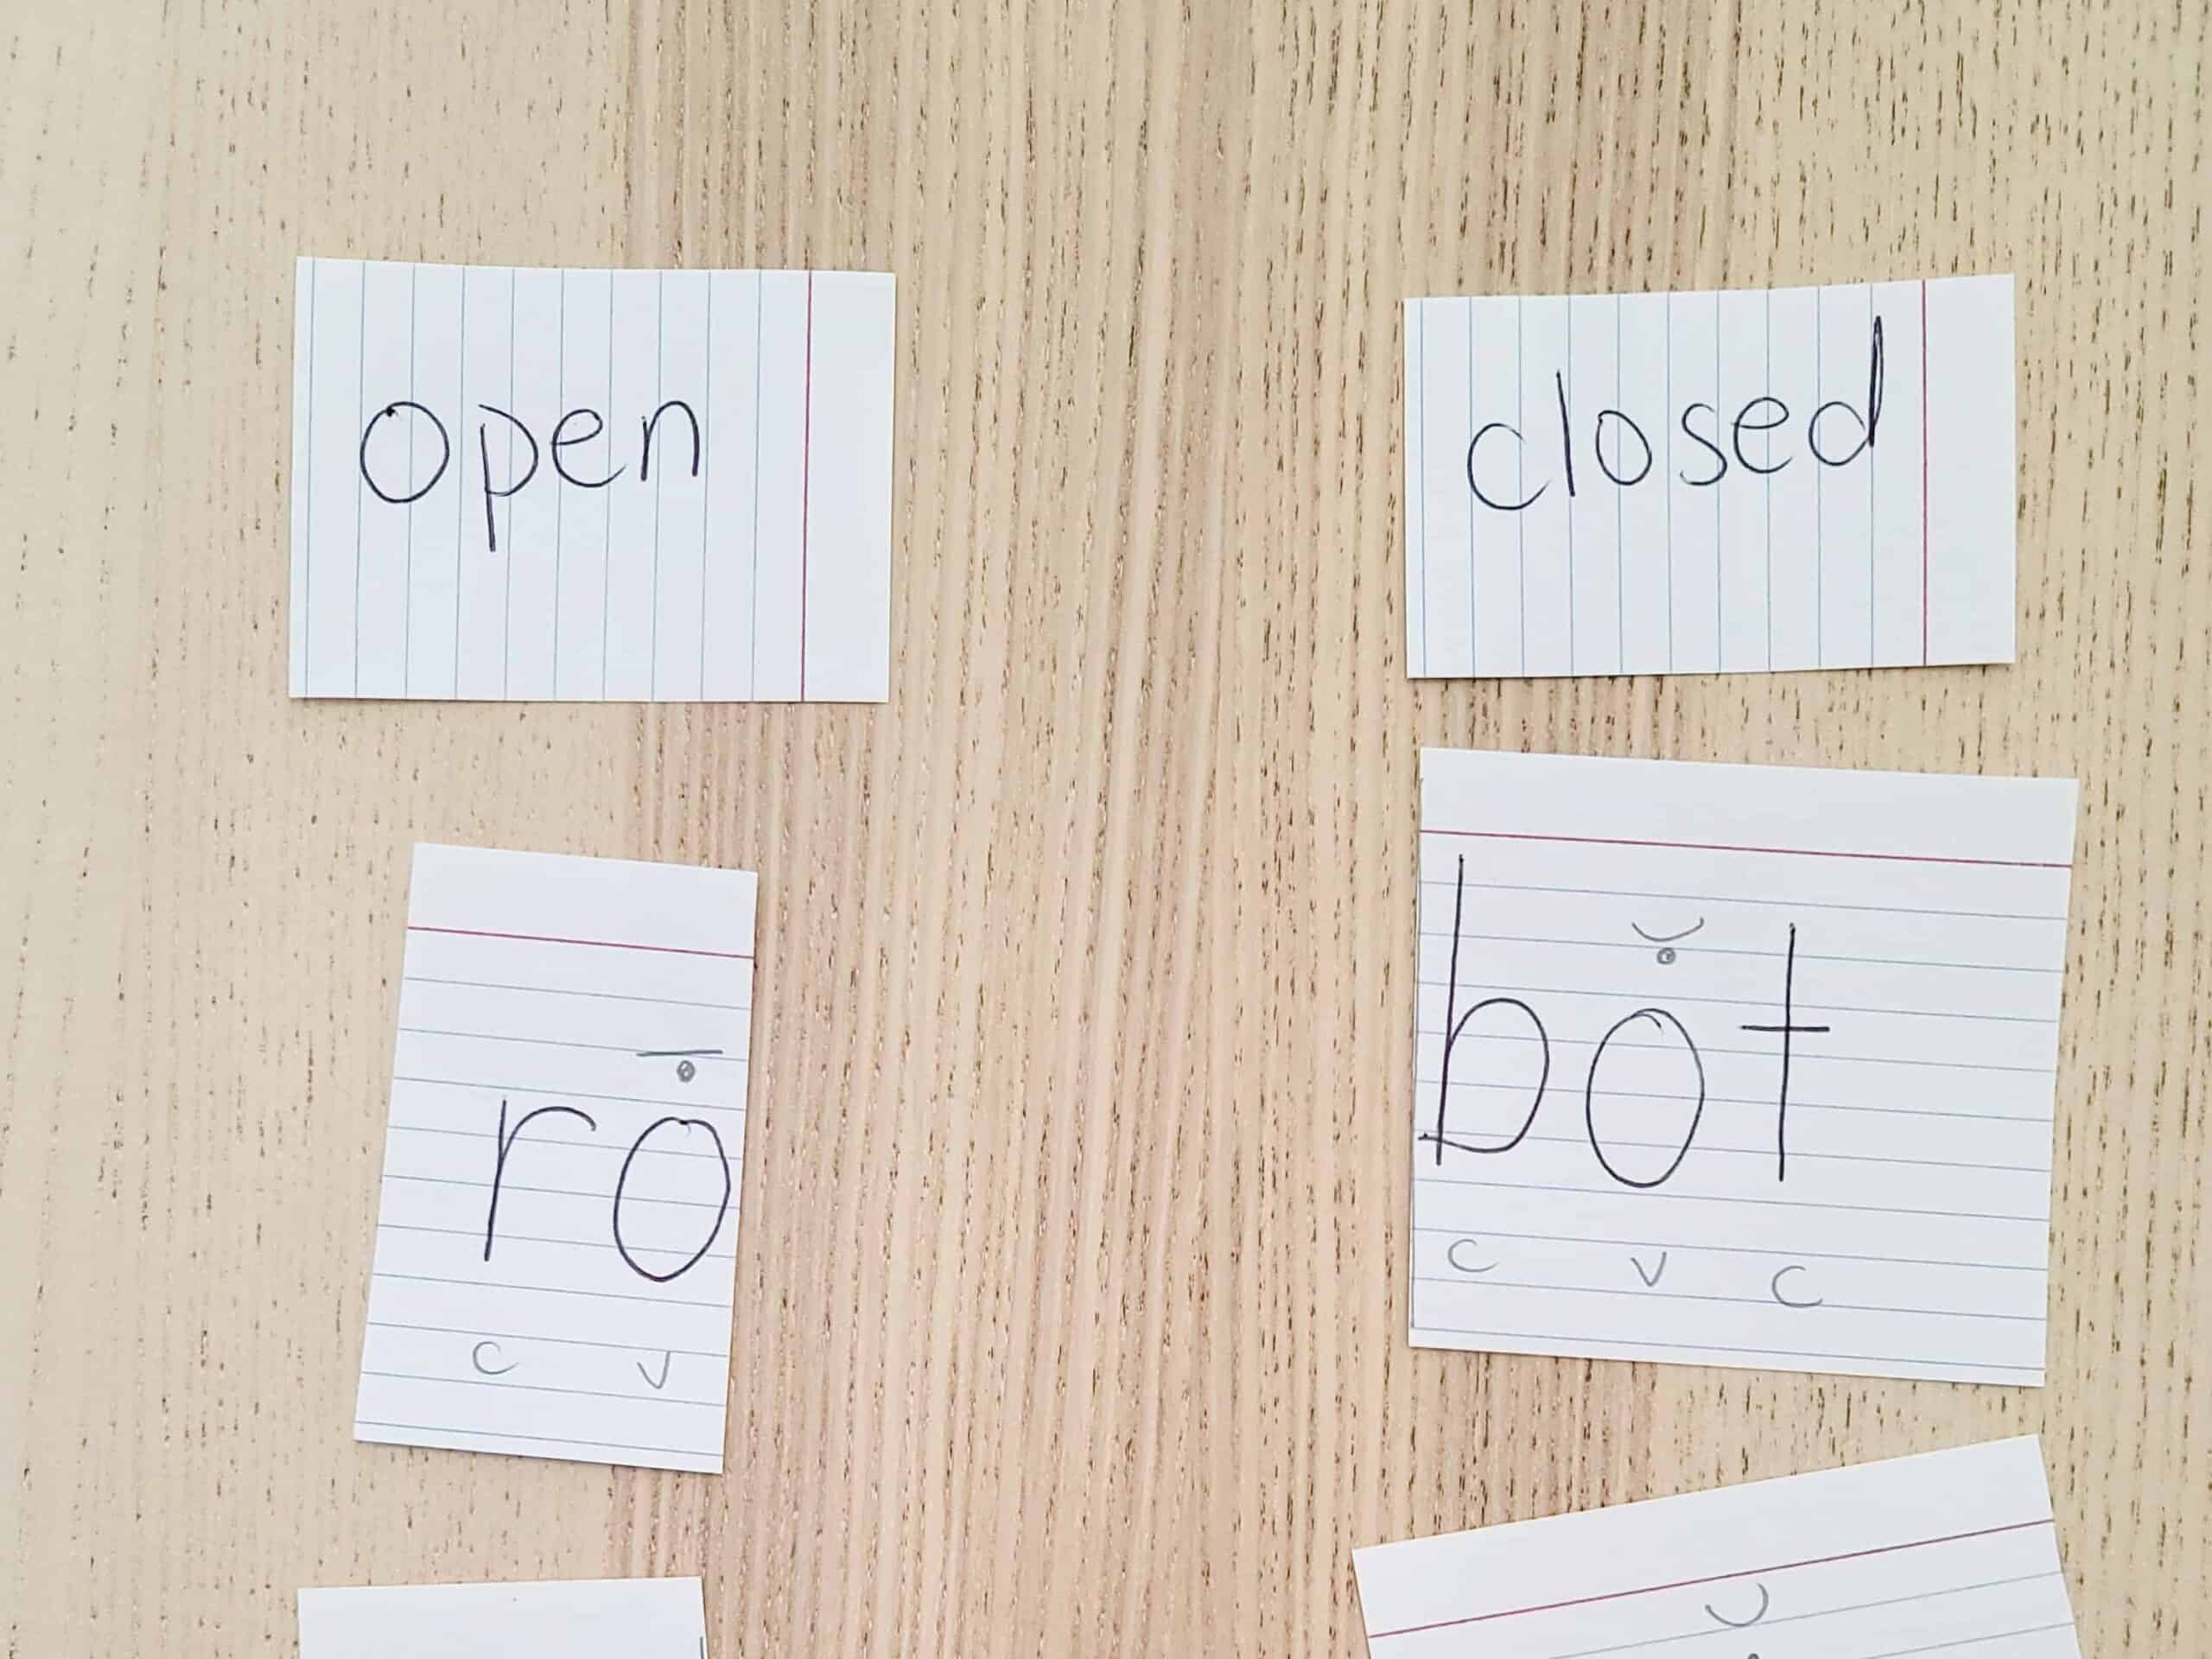 sorting cut syllables by open and closed